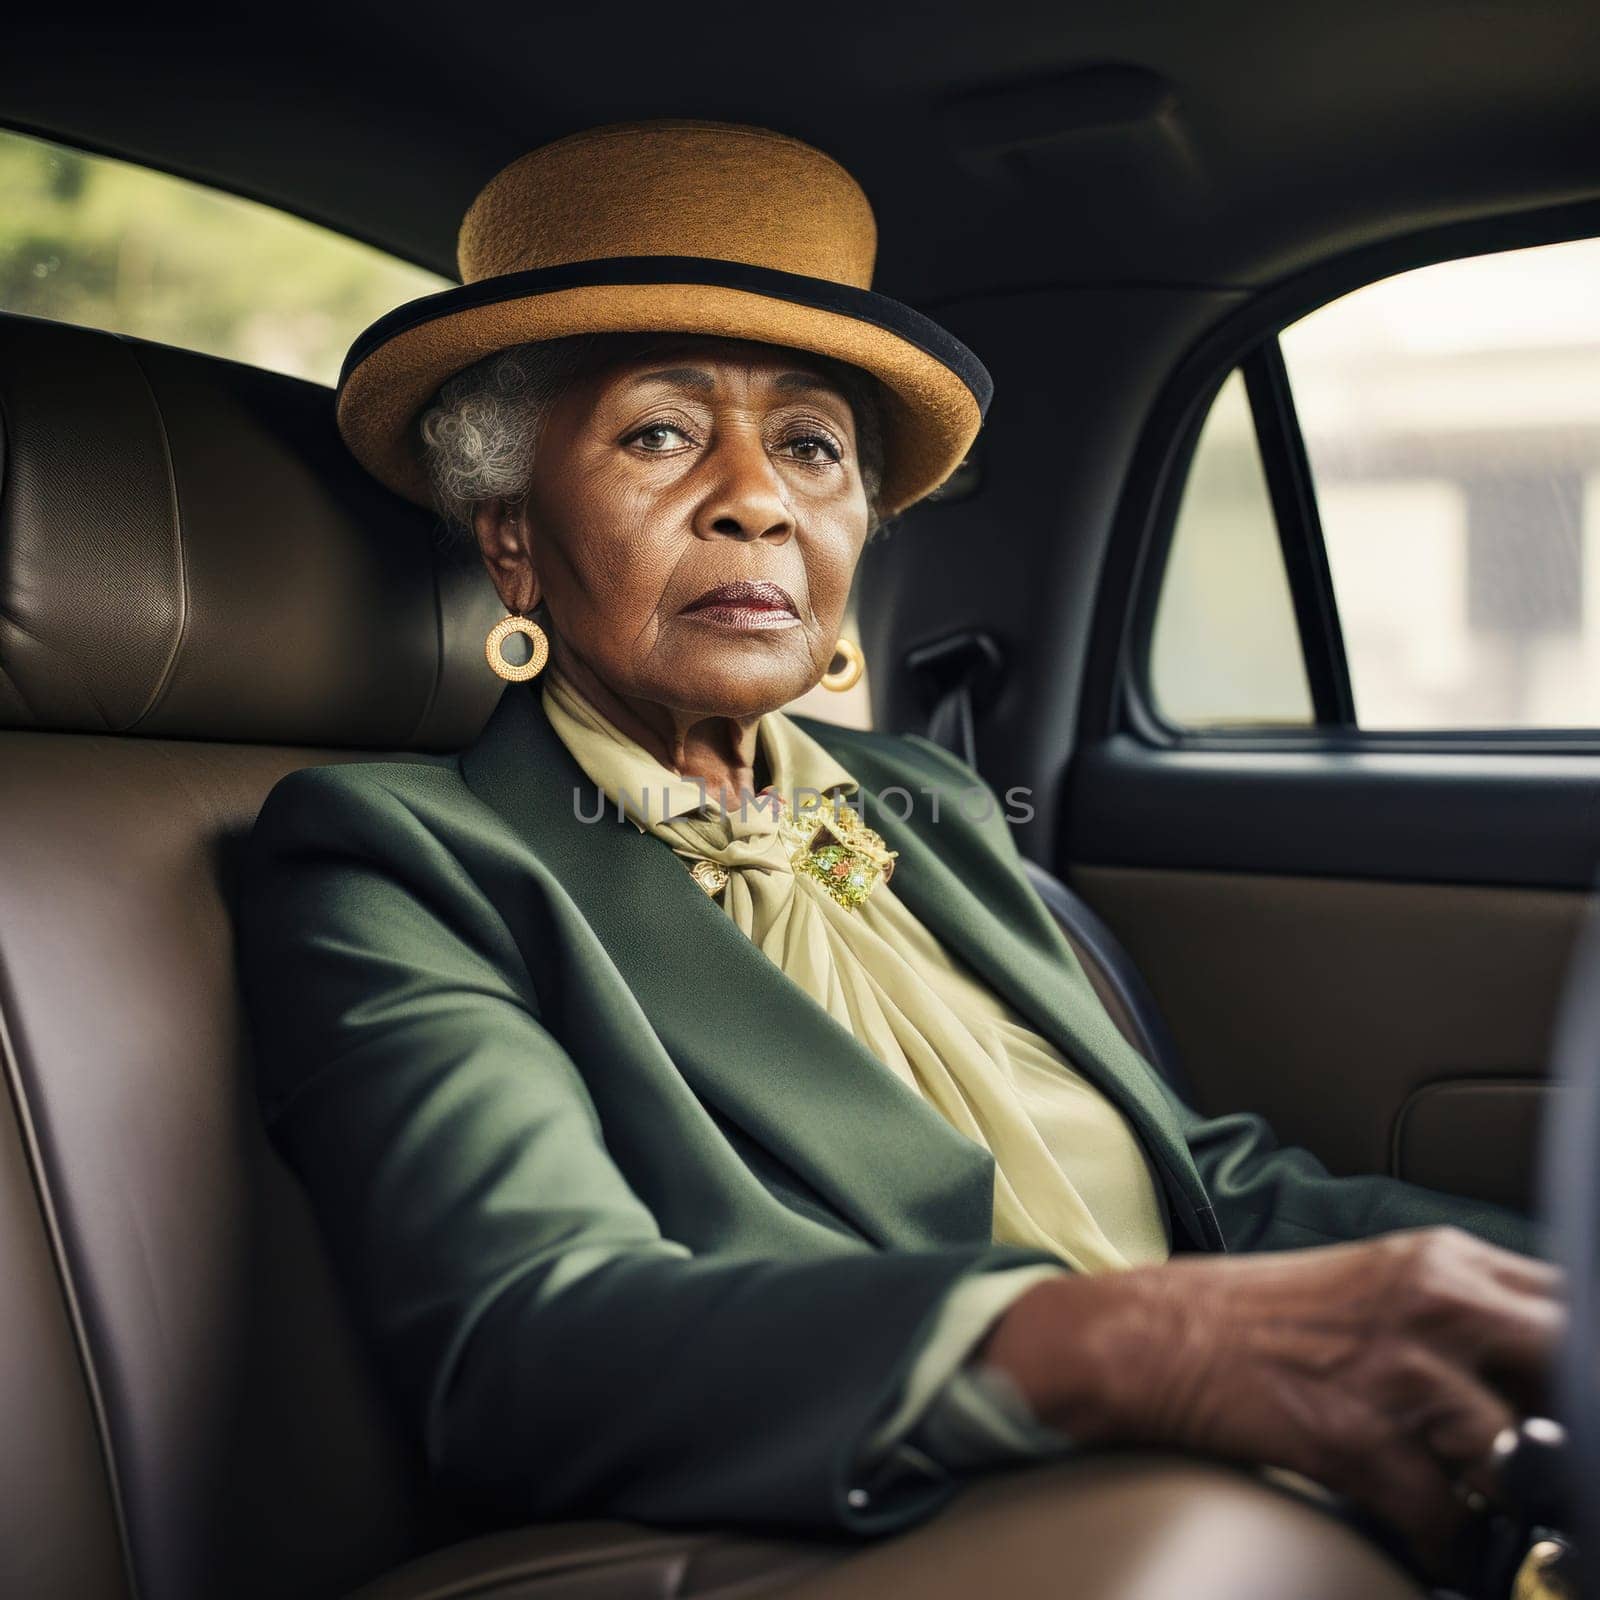 Adult african american woman appreciates the interior of the car in the cabin by Yurich32